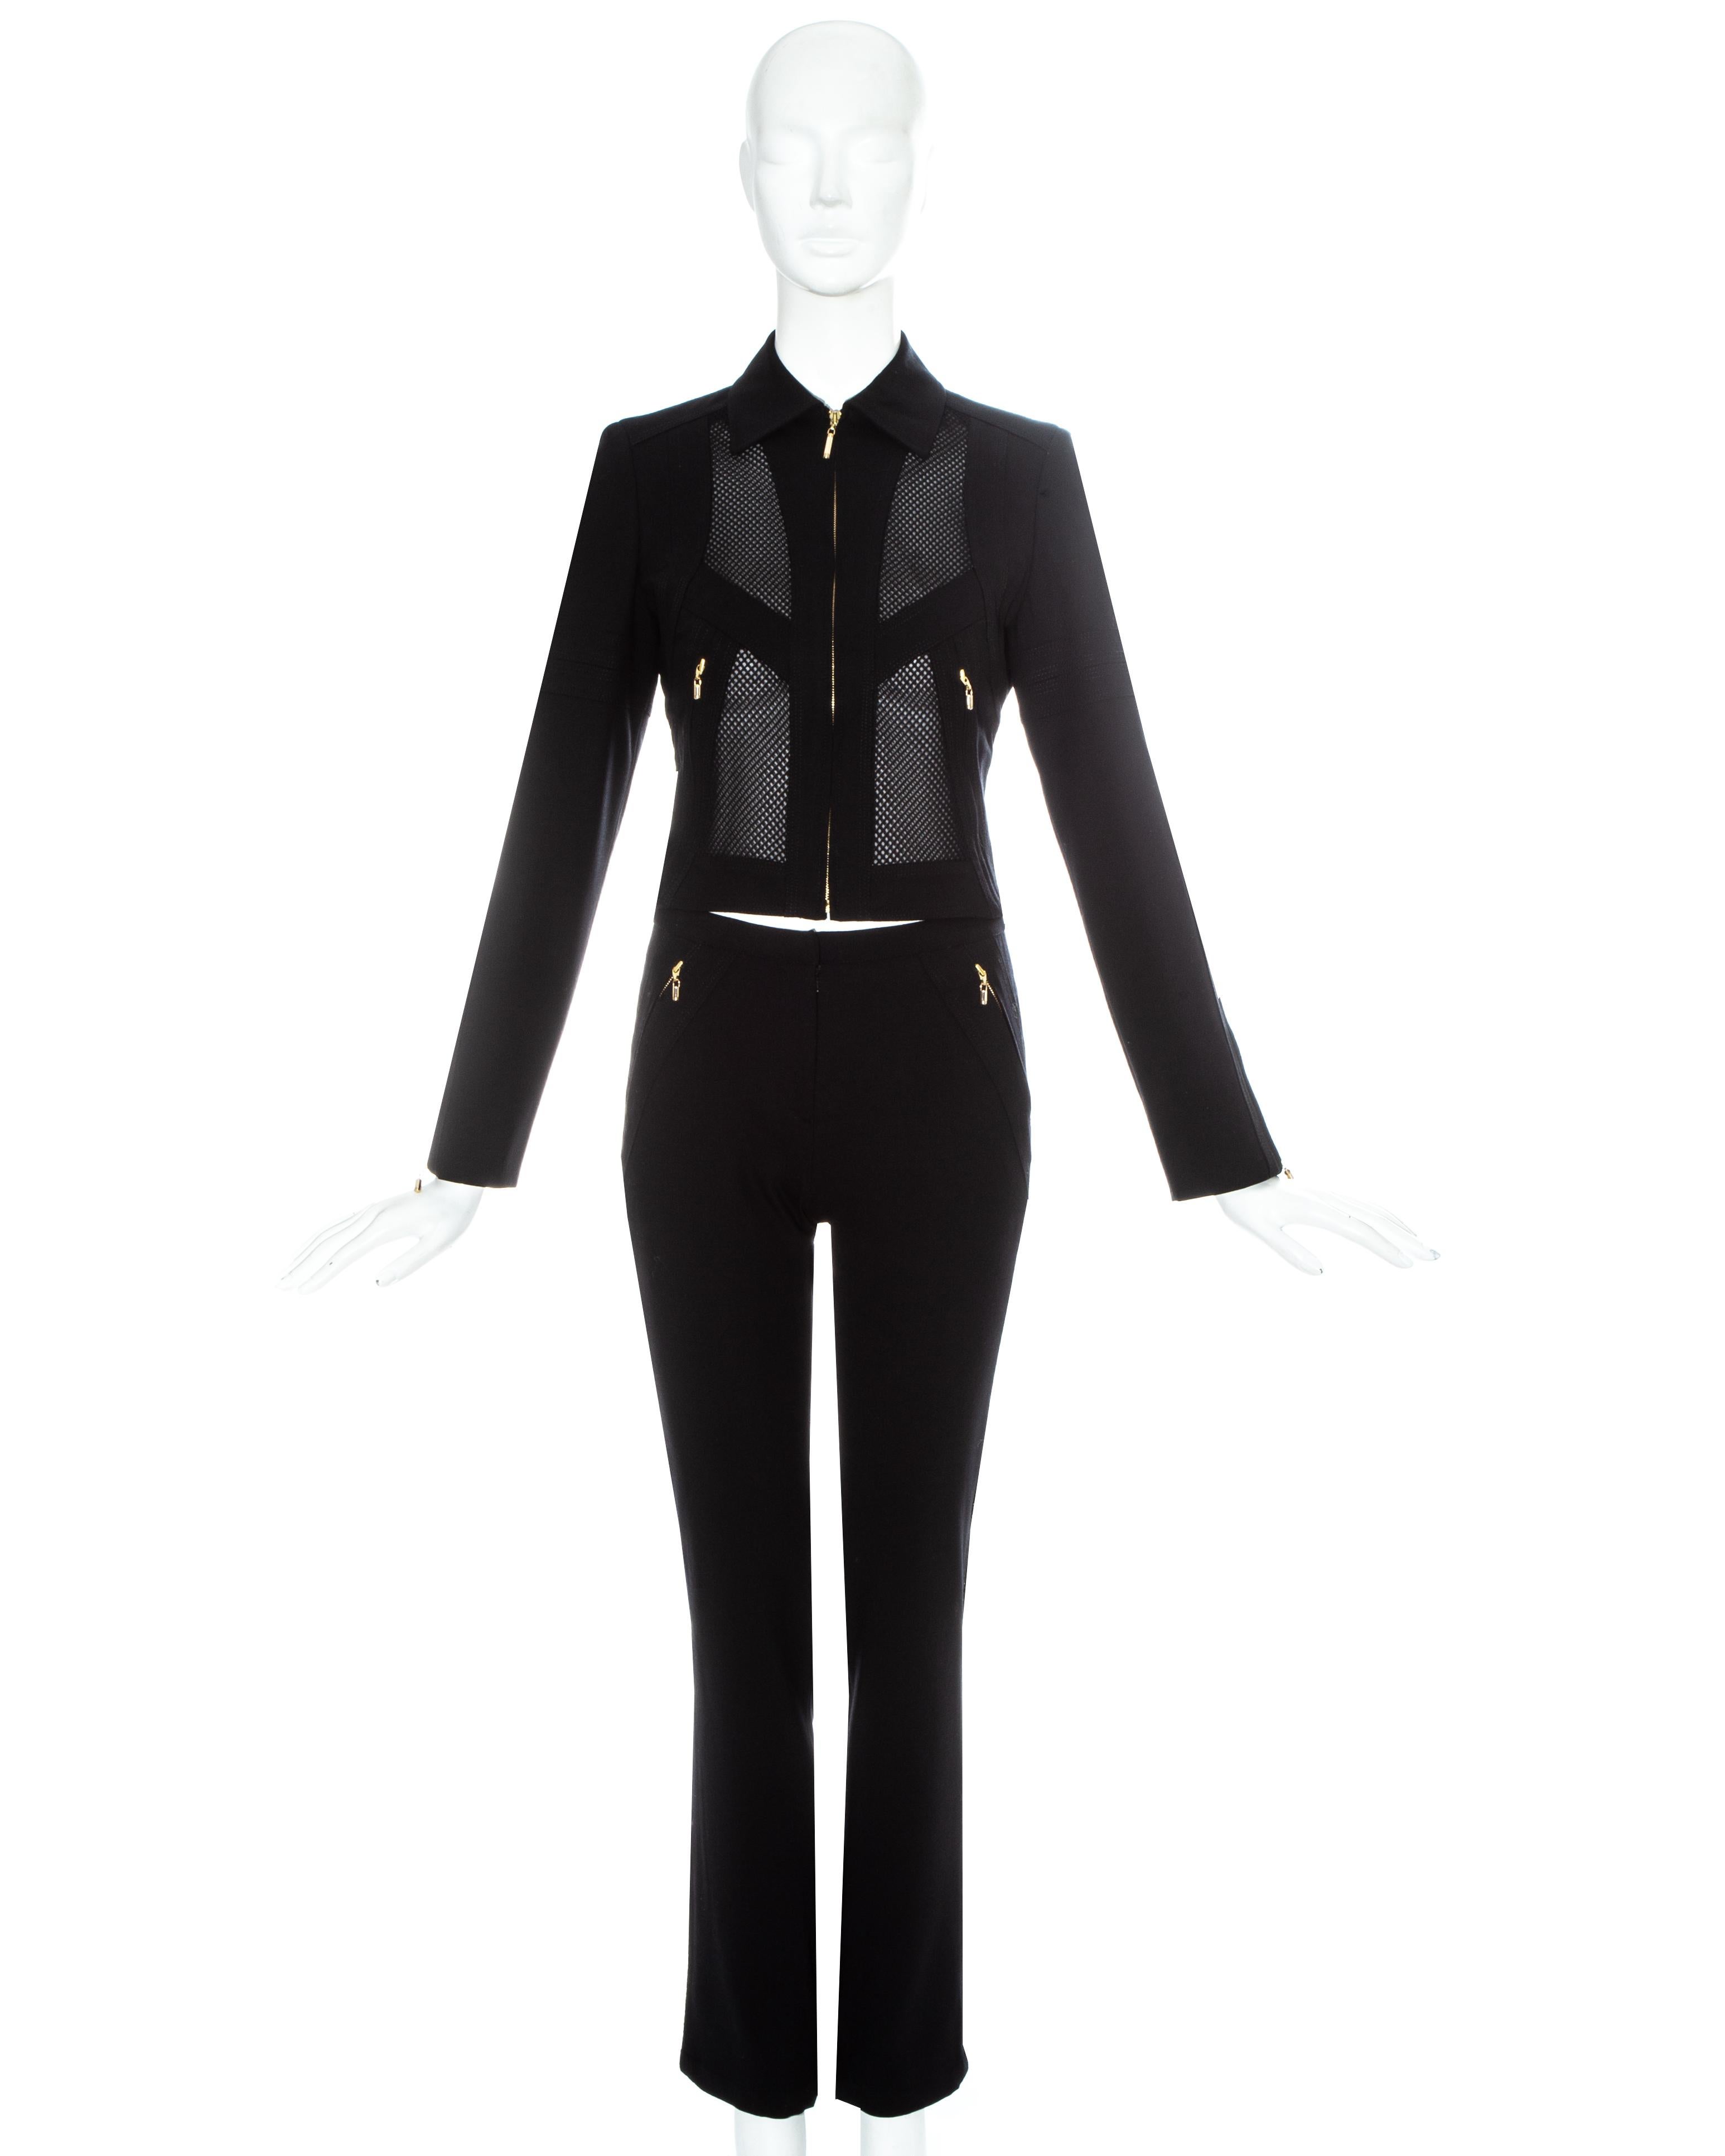 Gianni Versace black lycra and mesh pant suit with gold tone zip fastenings

Spring-Summer 20033